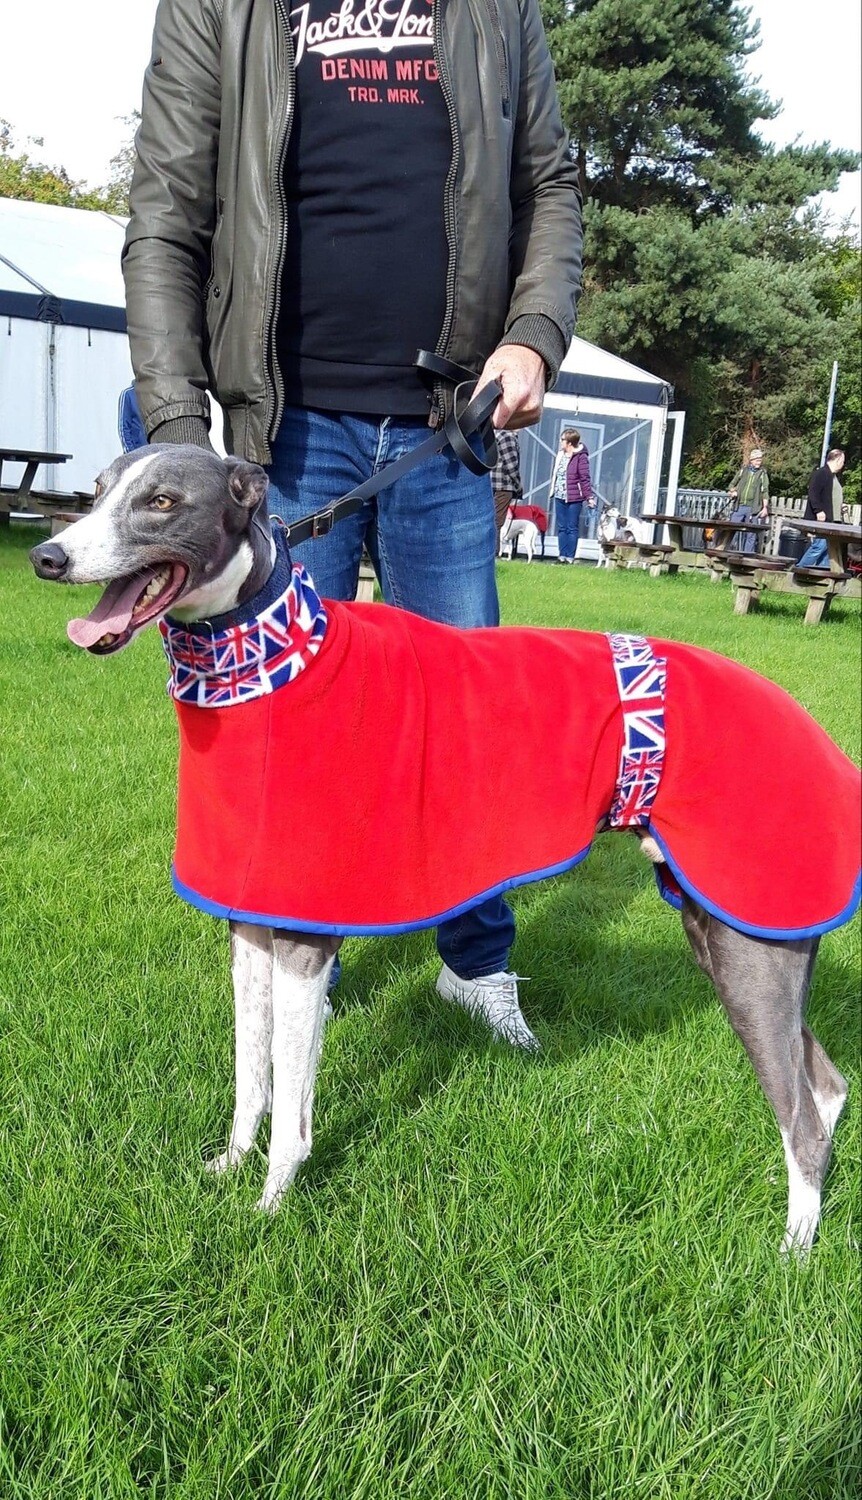 ALL SIZES!! - Red Fleece with Union Jack Red White & Blue Fleece Trim - Large Whippet, Lurcher and Greyhound PJ's